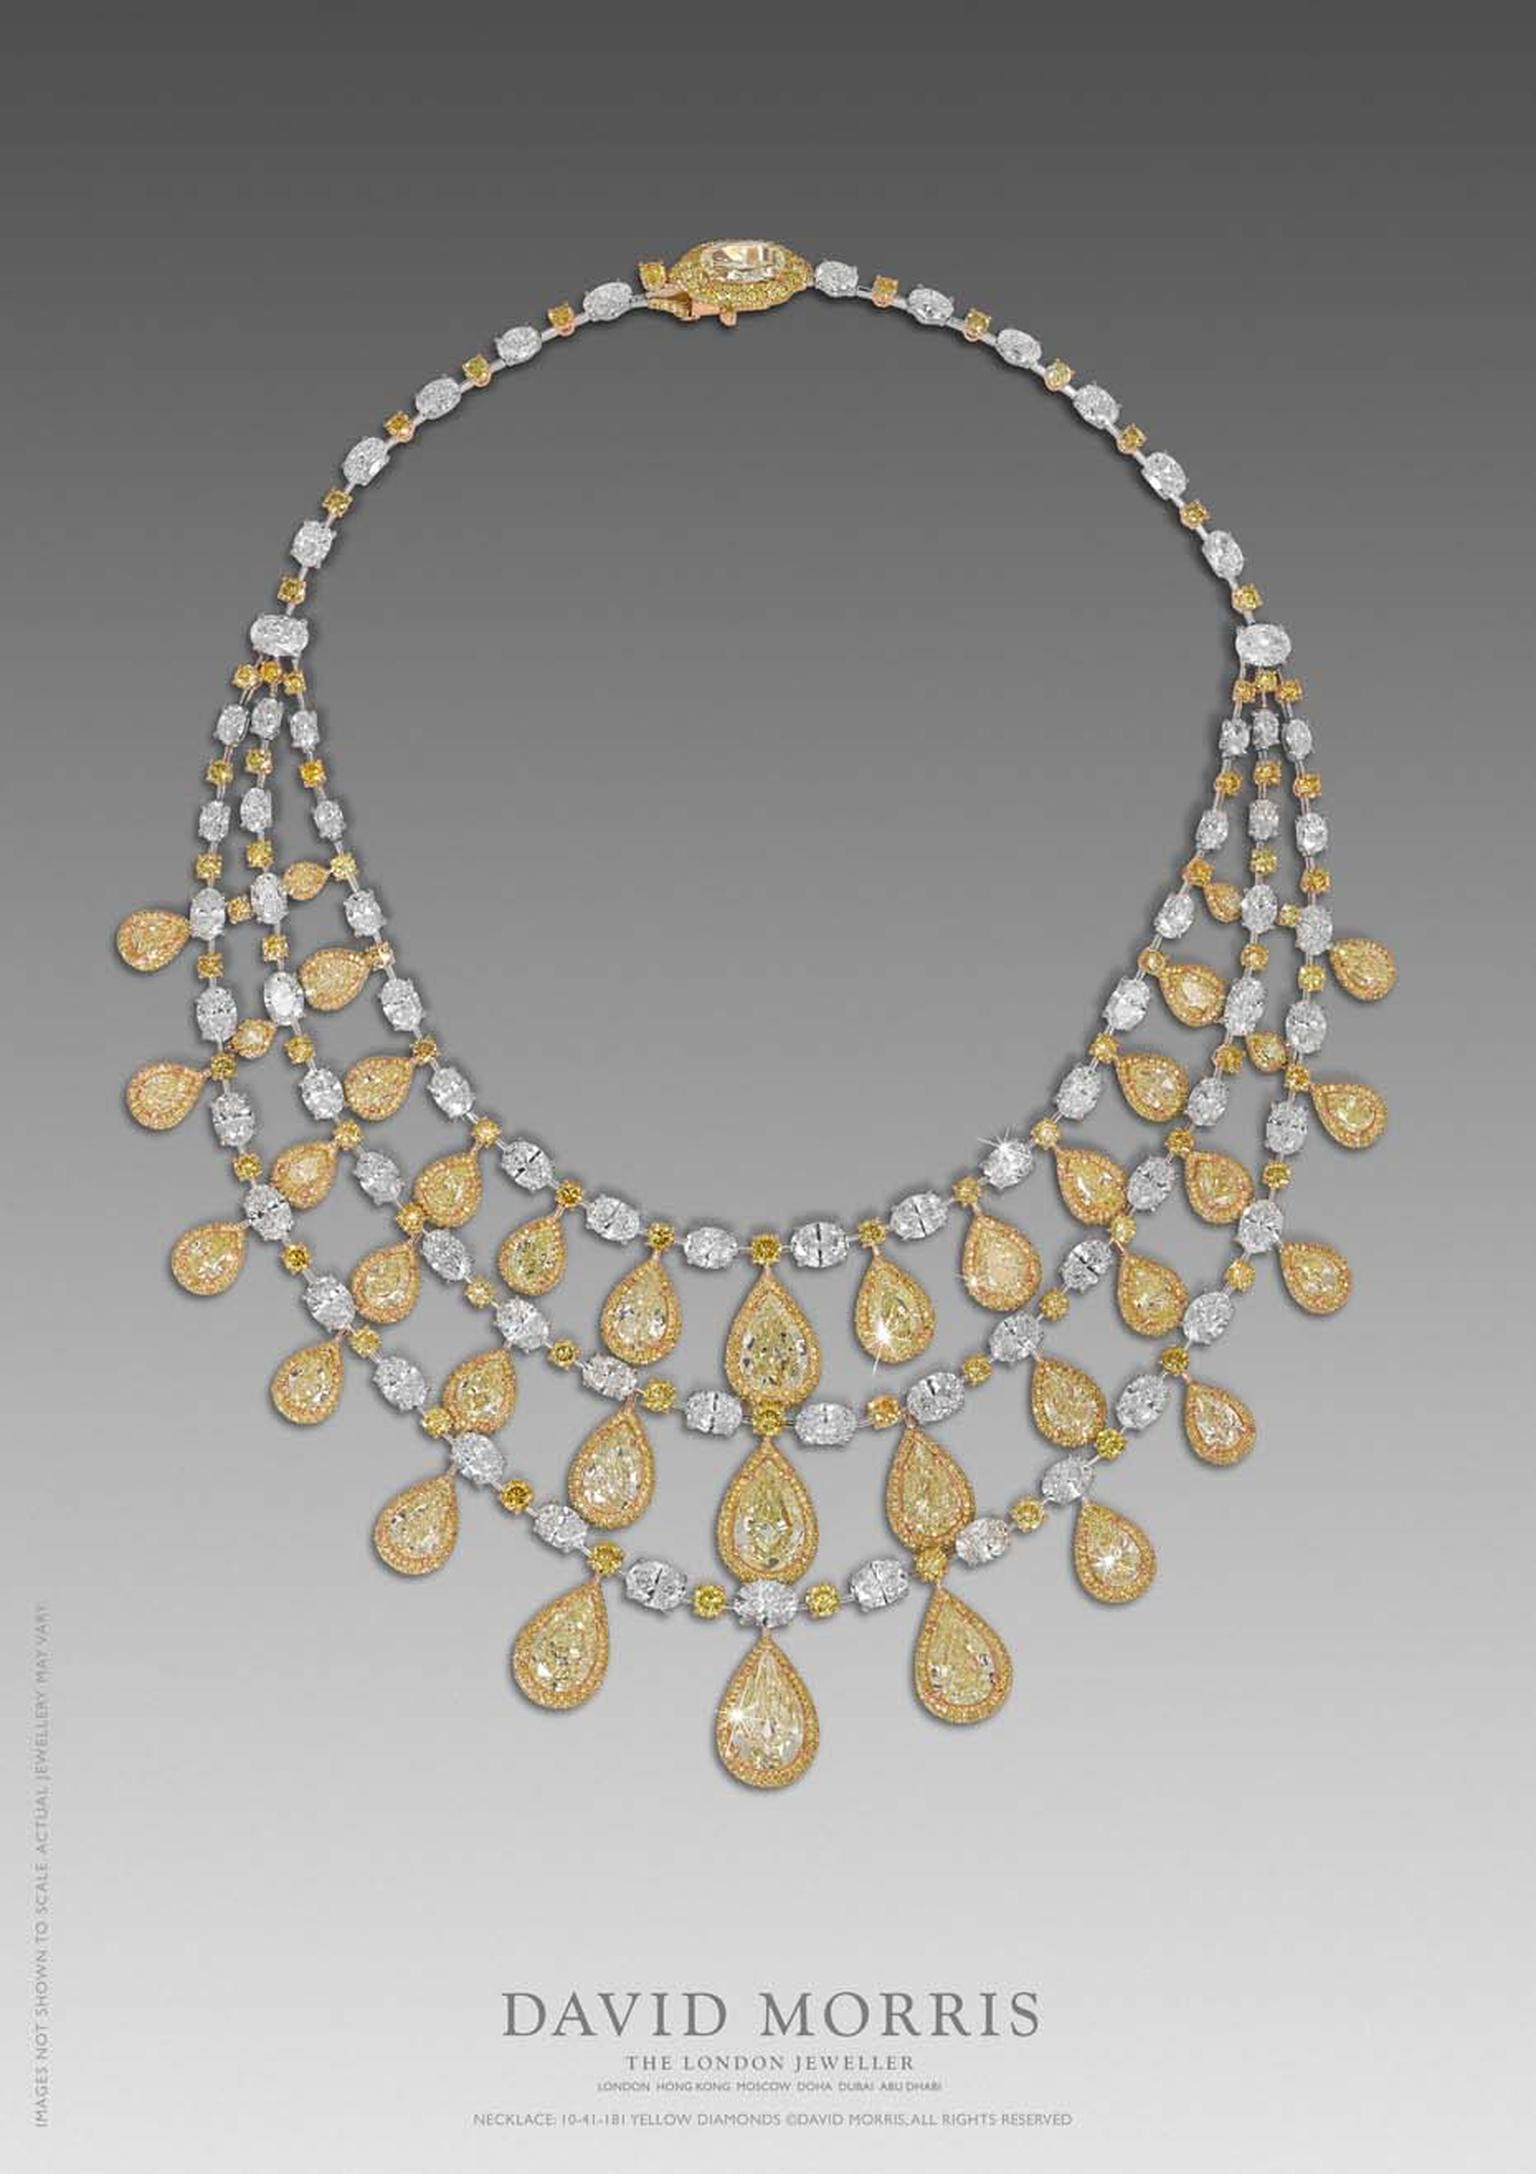 This mesmerising necklace set with 47.99ct of yellow, pear-shaped and white oval-cut diamonds is just one of the high jewellery pieces David Morris will be showing at DJWE.